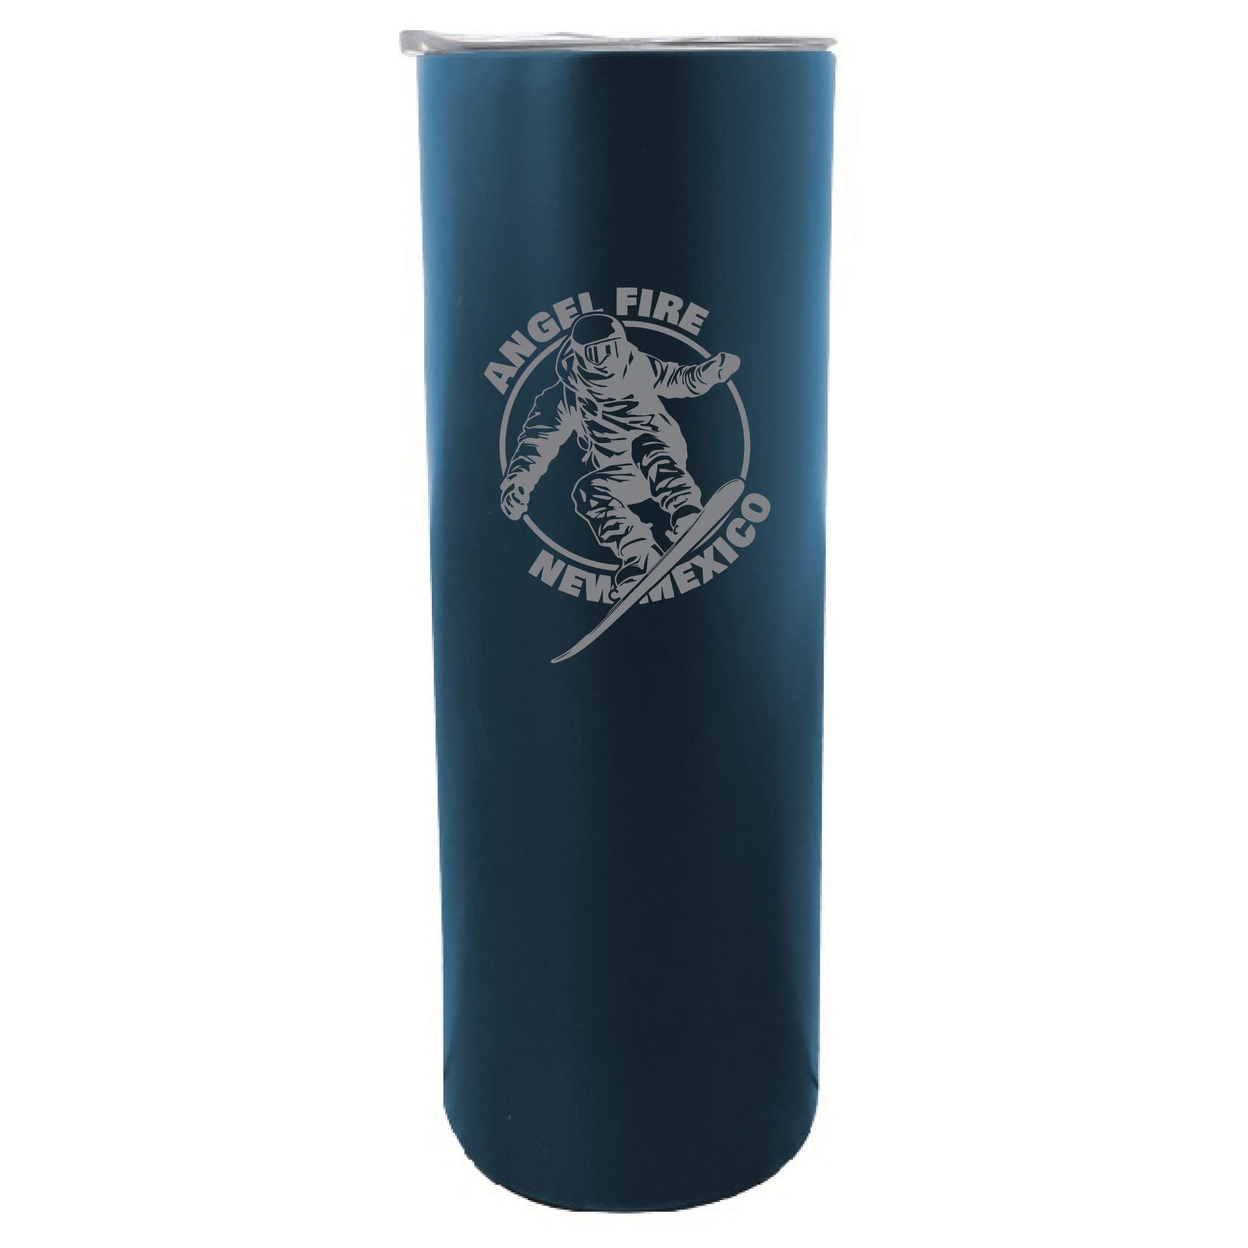 Angel Fire New Mexico Souvenir 20 Oz Engraved Insulated Stainless Steel Skinny Tumbler - Navy,,4-Pack